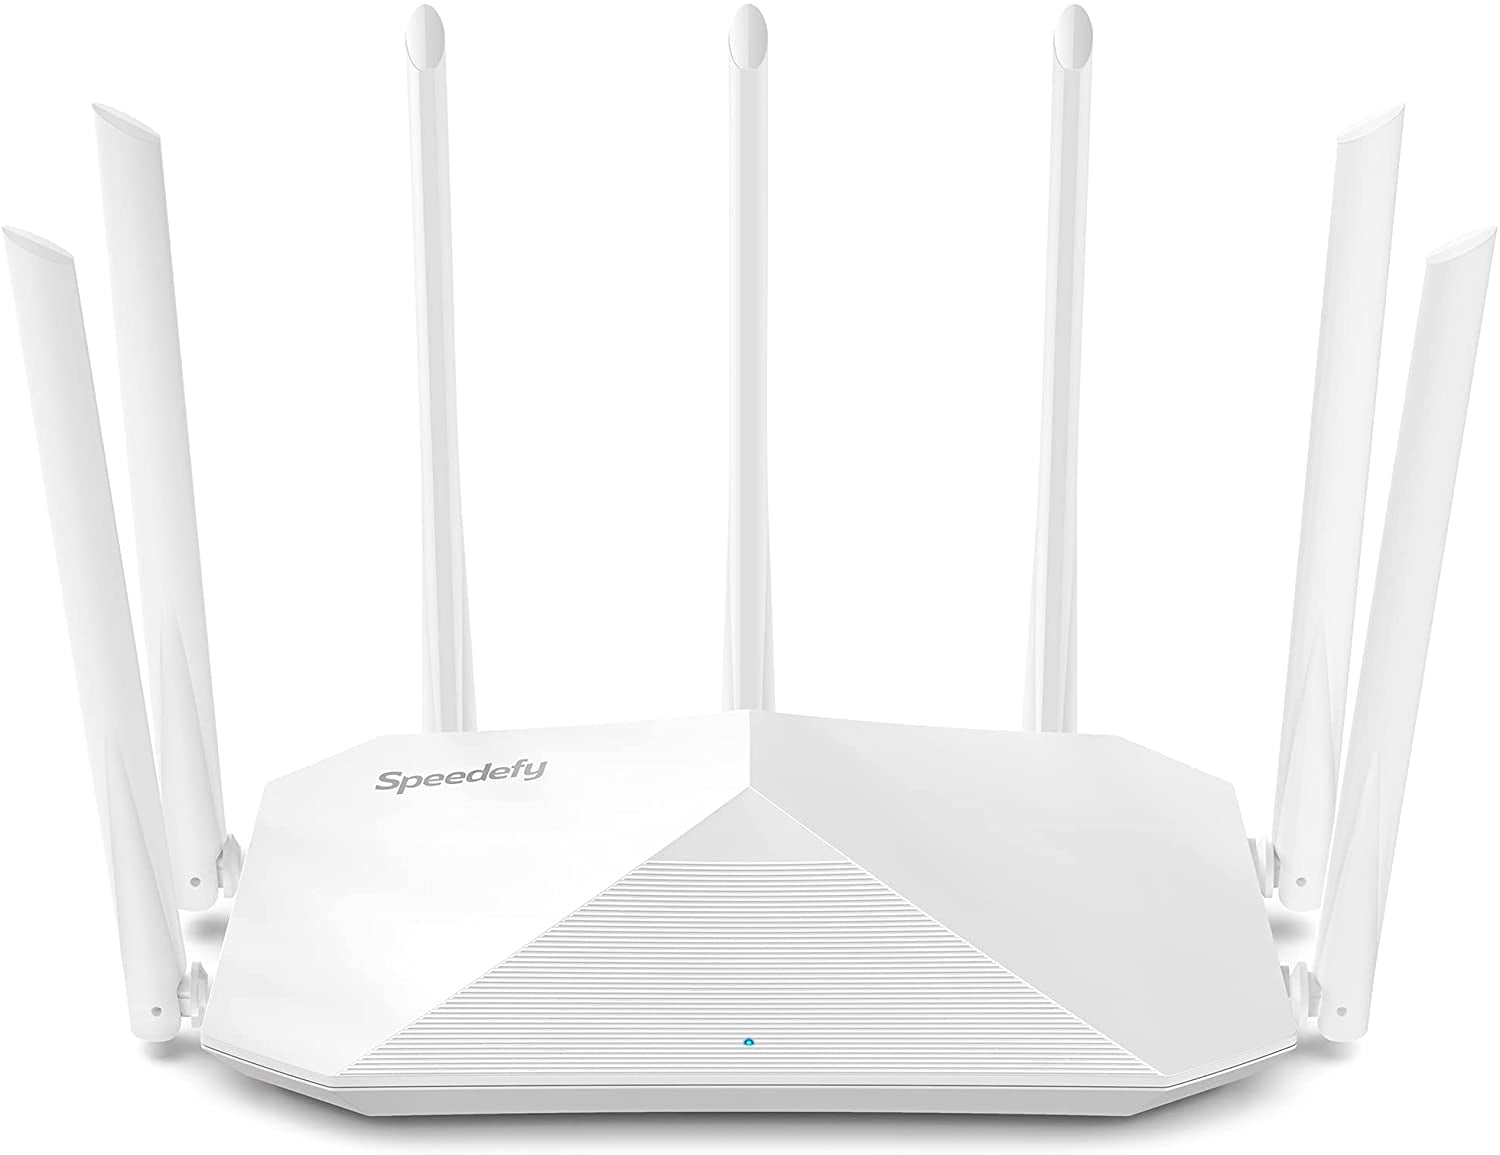 Model: Connectize G6 Easy Setup Parental Control AC2100 Dual Band High Speed Wireless Router for Home & Gaming Gigabit WiFi Router MU-MIMO for Superb 2300 Sq.Ft Coverage & 30+ Devices 6 Antennas 